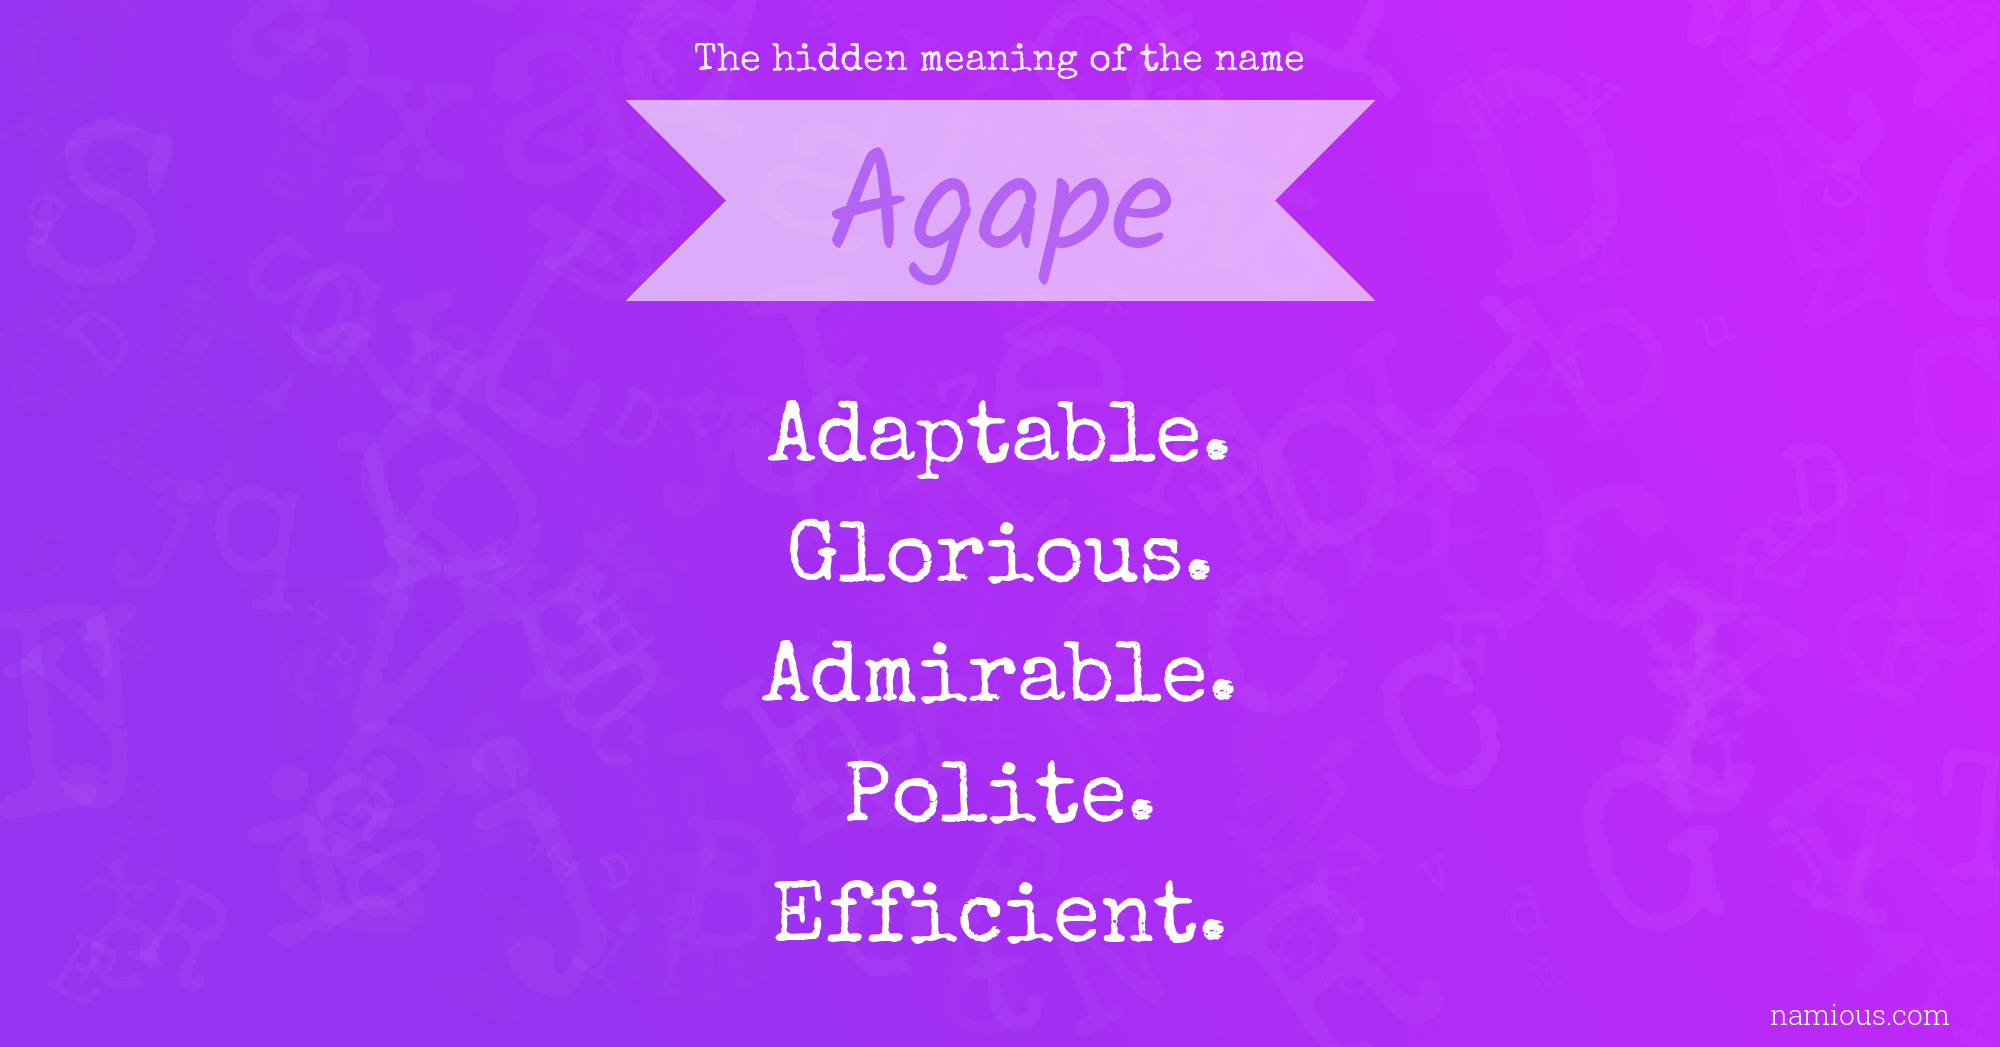 The hidden meaning of the name Agape